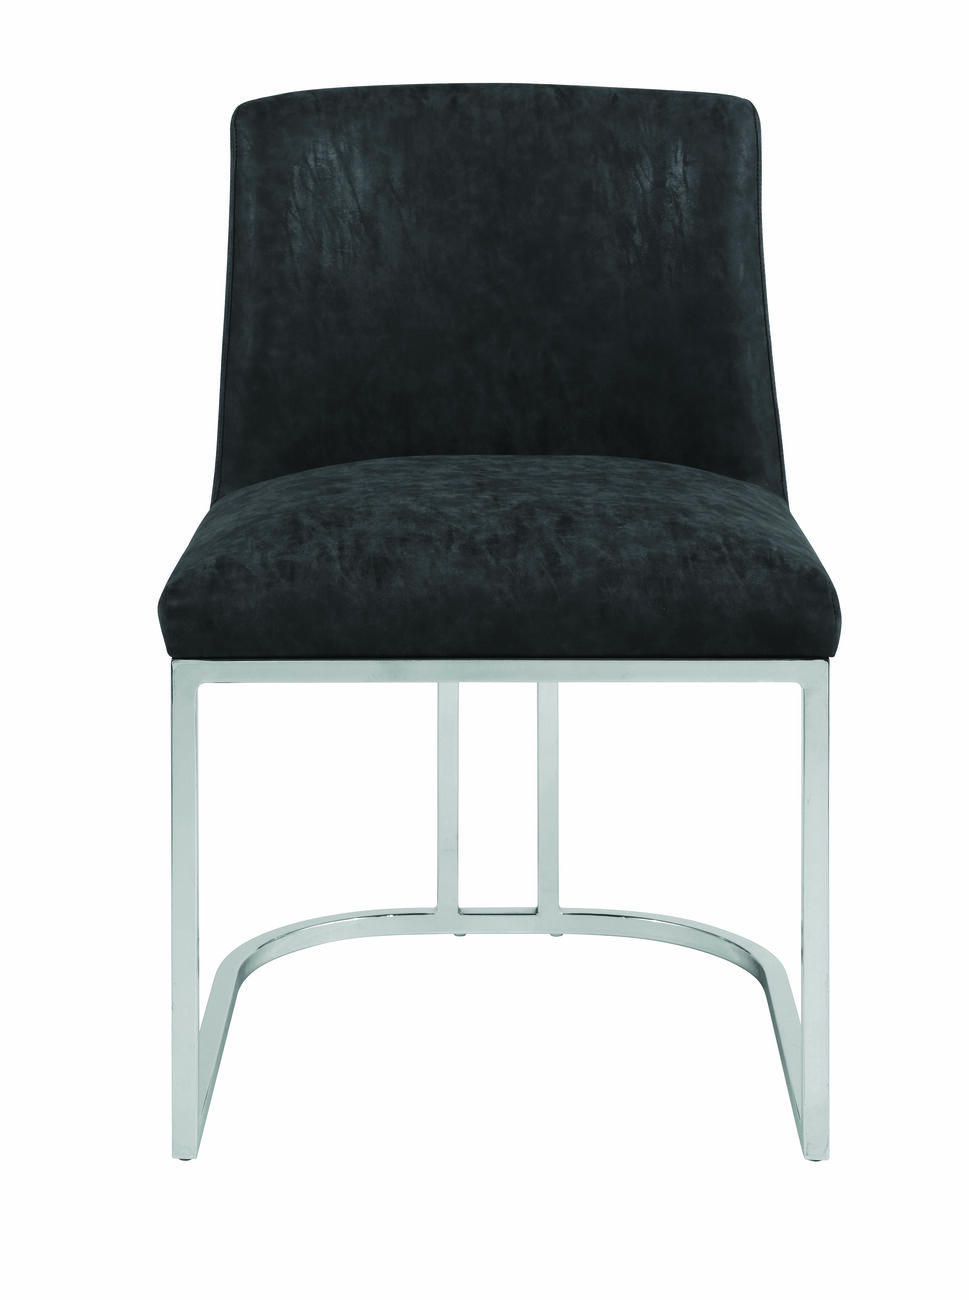 Leatherette Upholstered Dining Chair with Metal Cantilever Base, Black and Silver